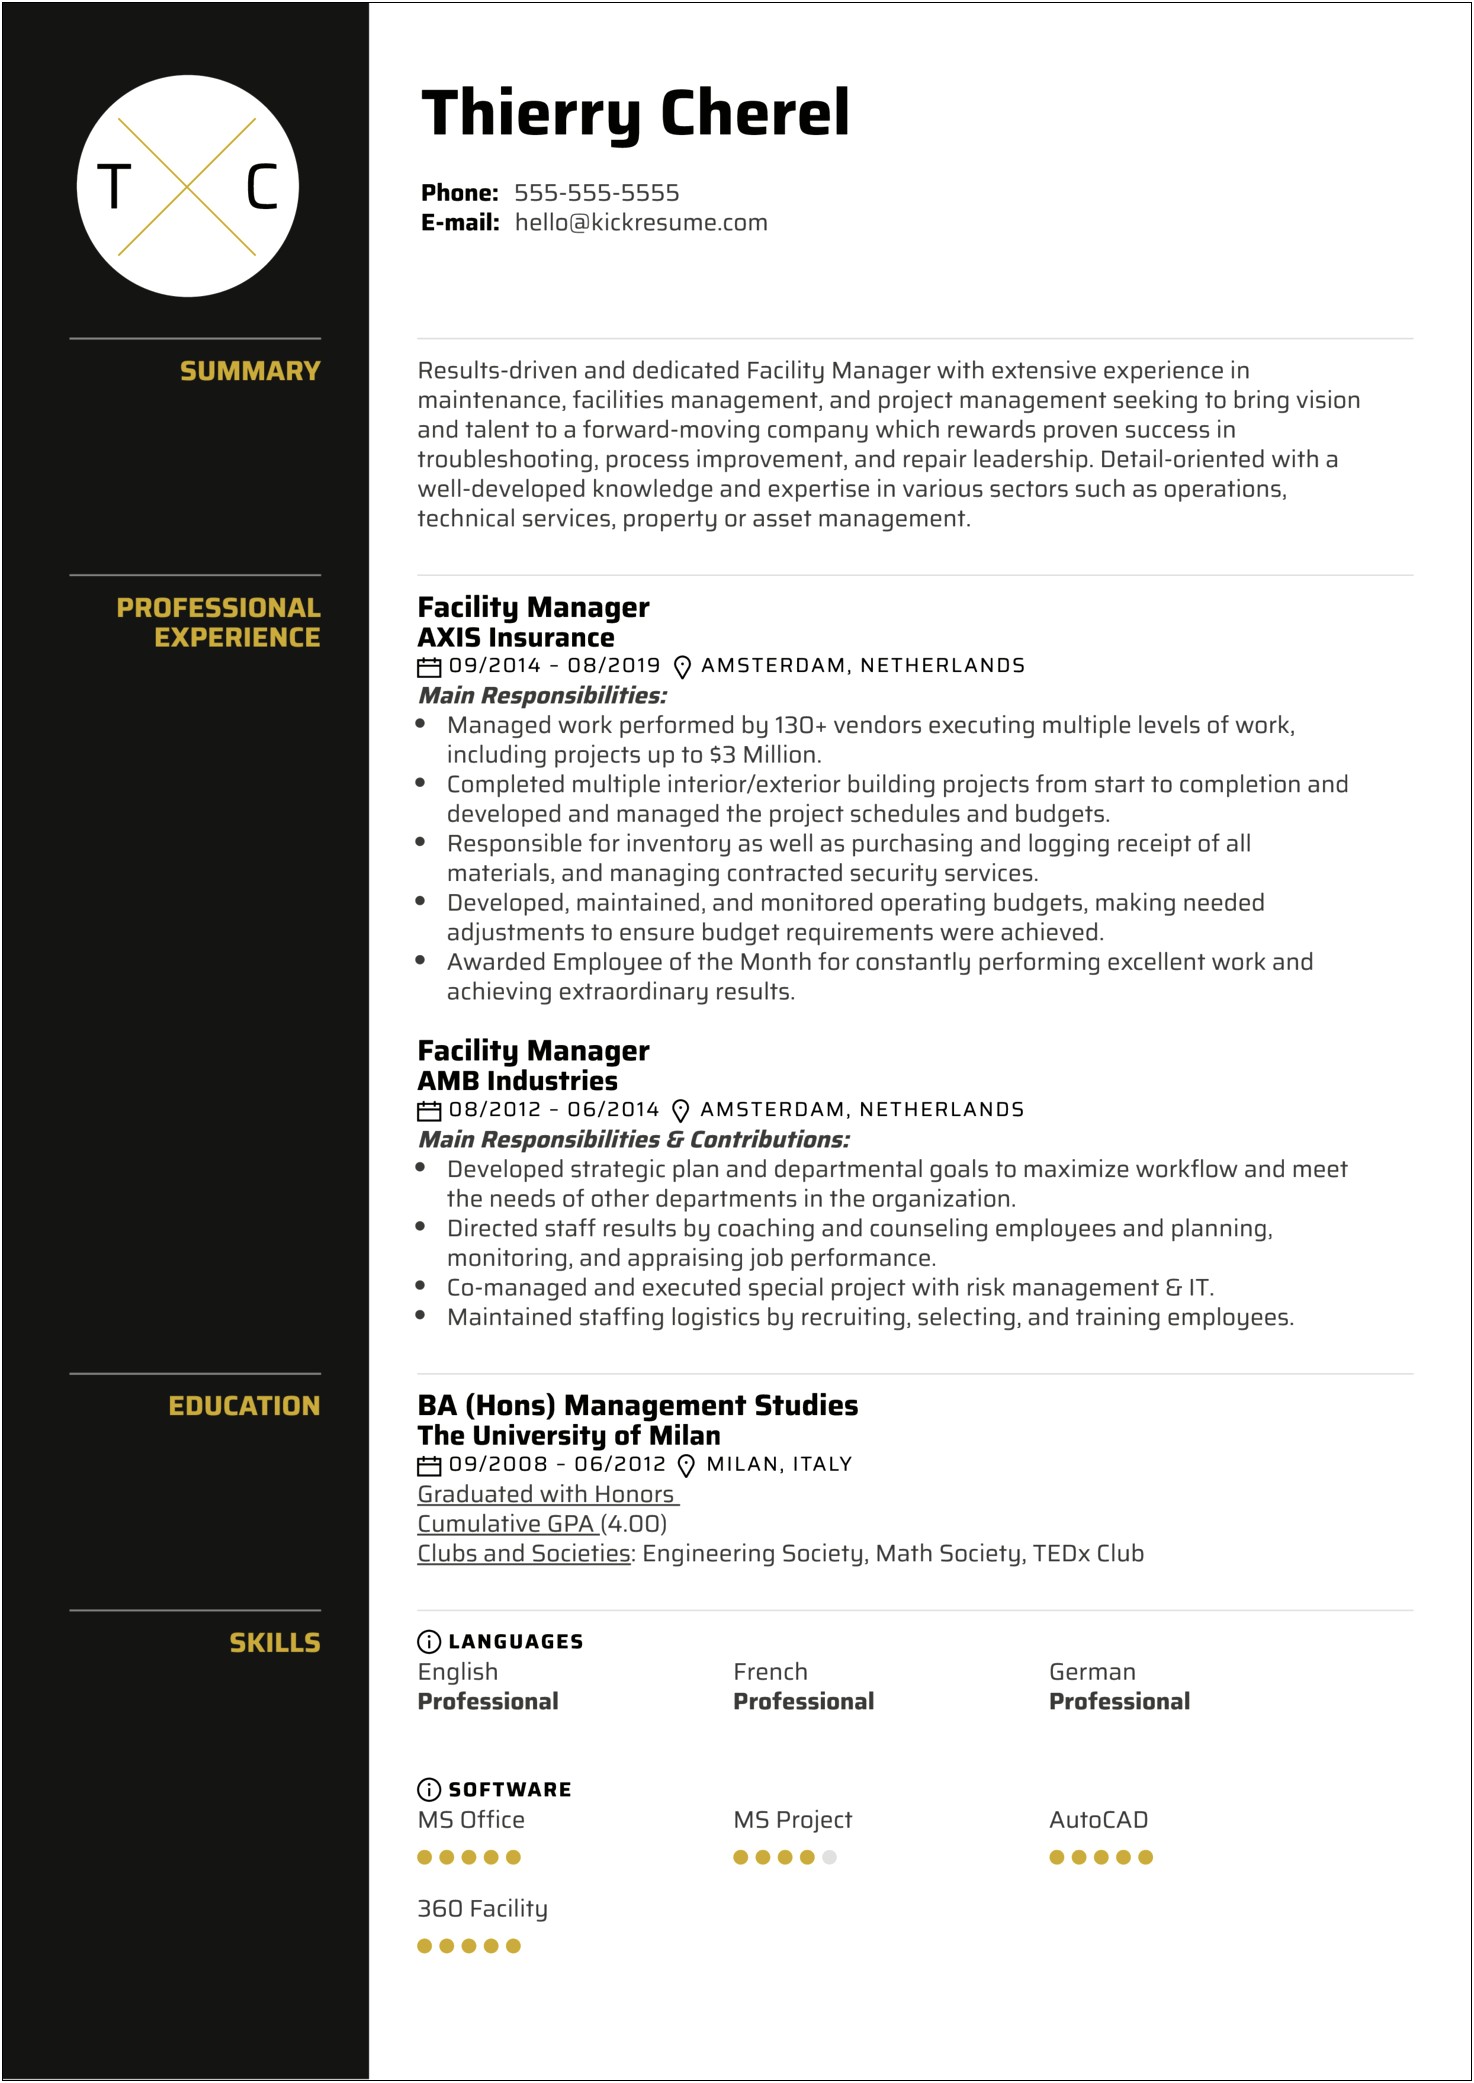 Resume Headline For Facility Manager